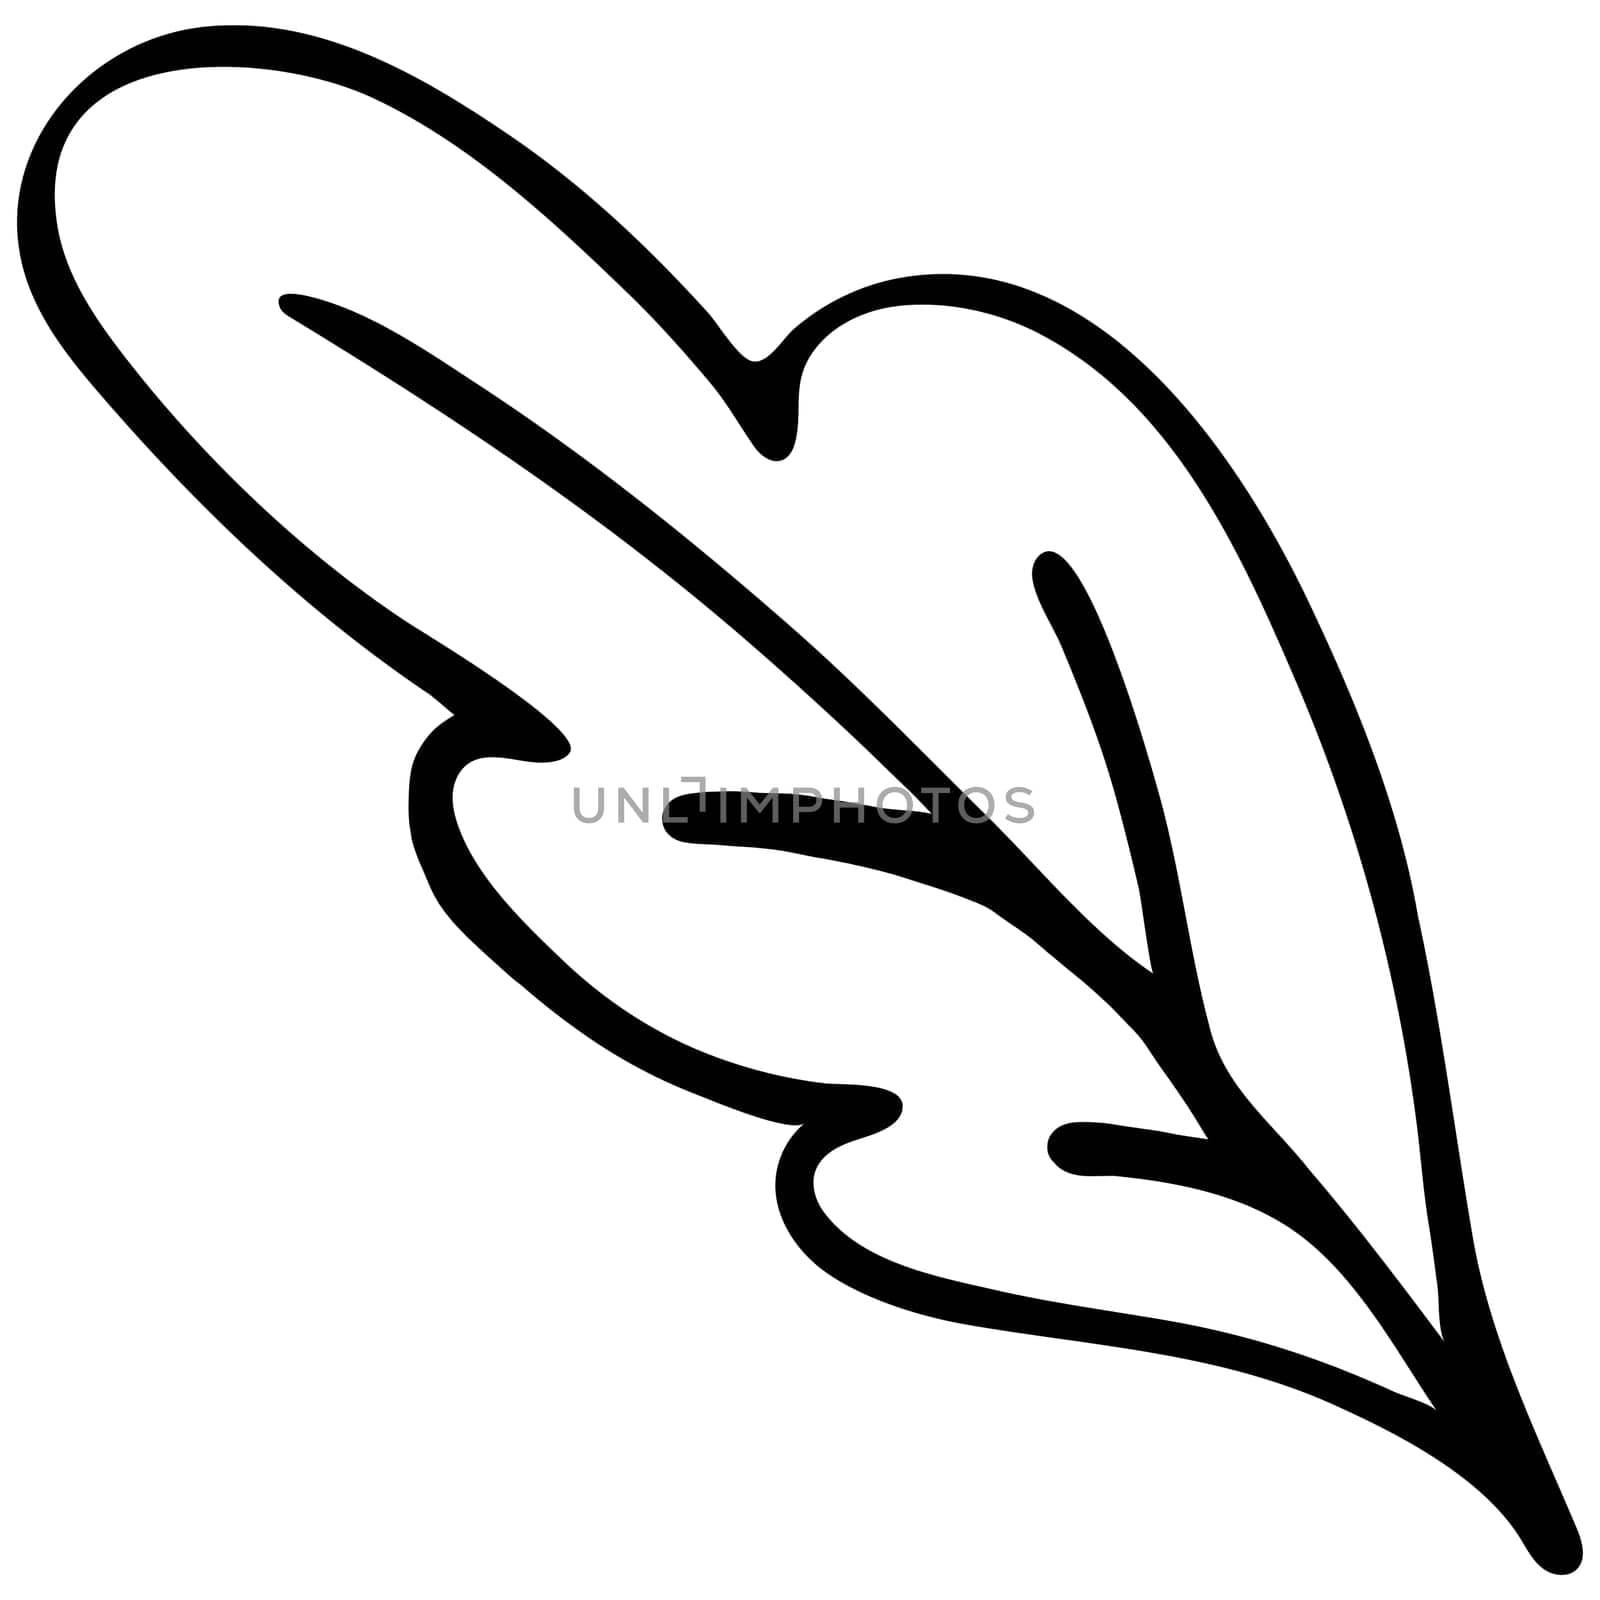 Black and White Hand Drawn Decorative Graphic Flower Leaf. Abstract Leaf Icon for Coloring Page, Book or Sheet for Kids.